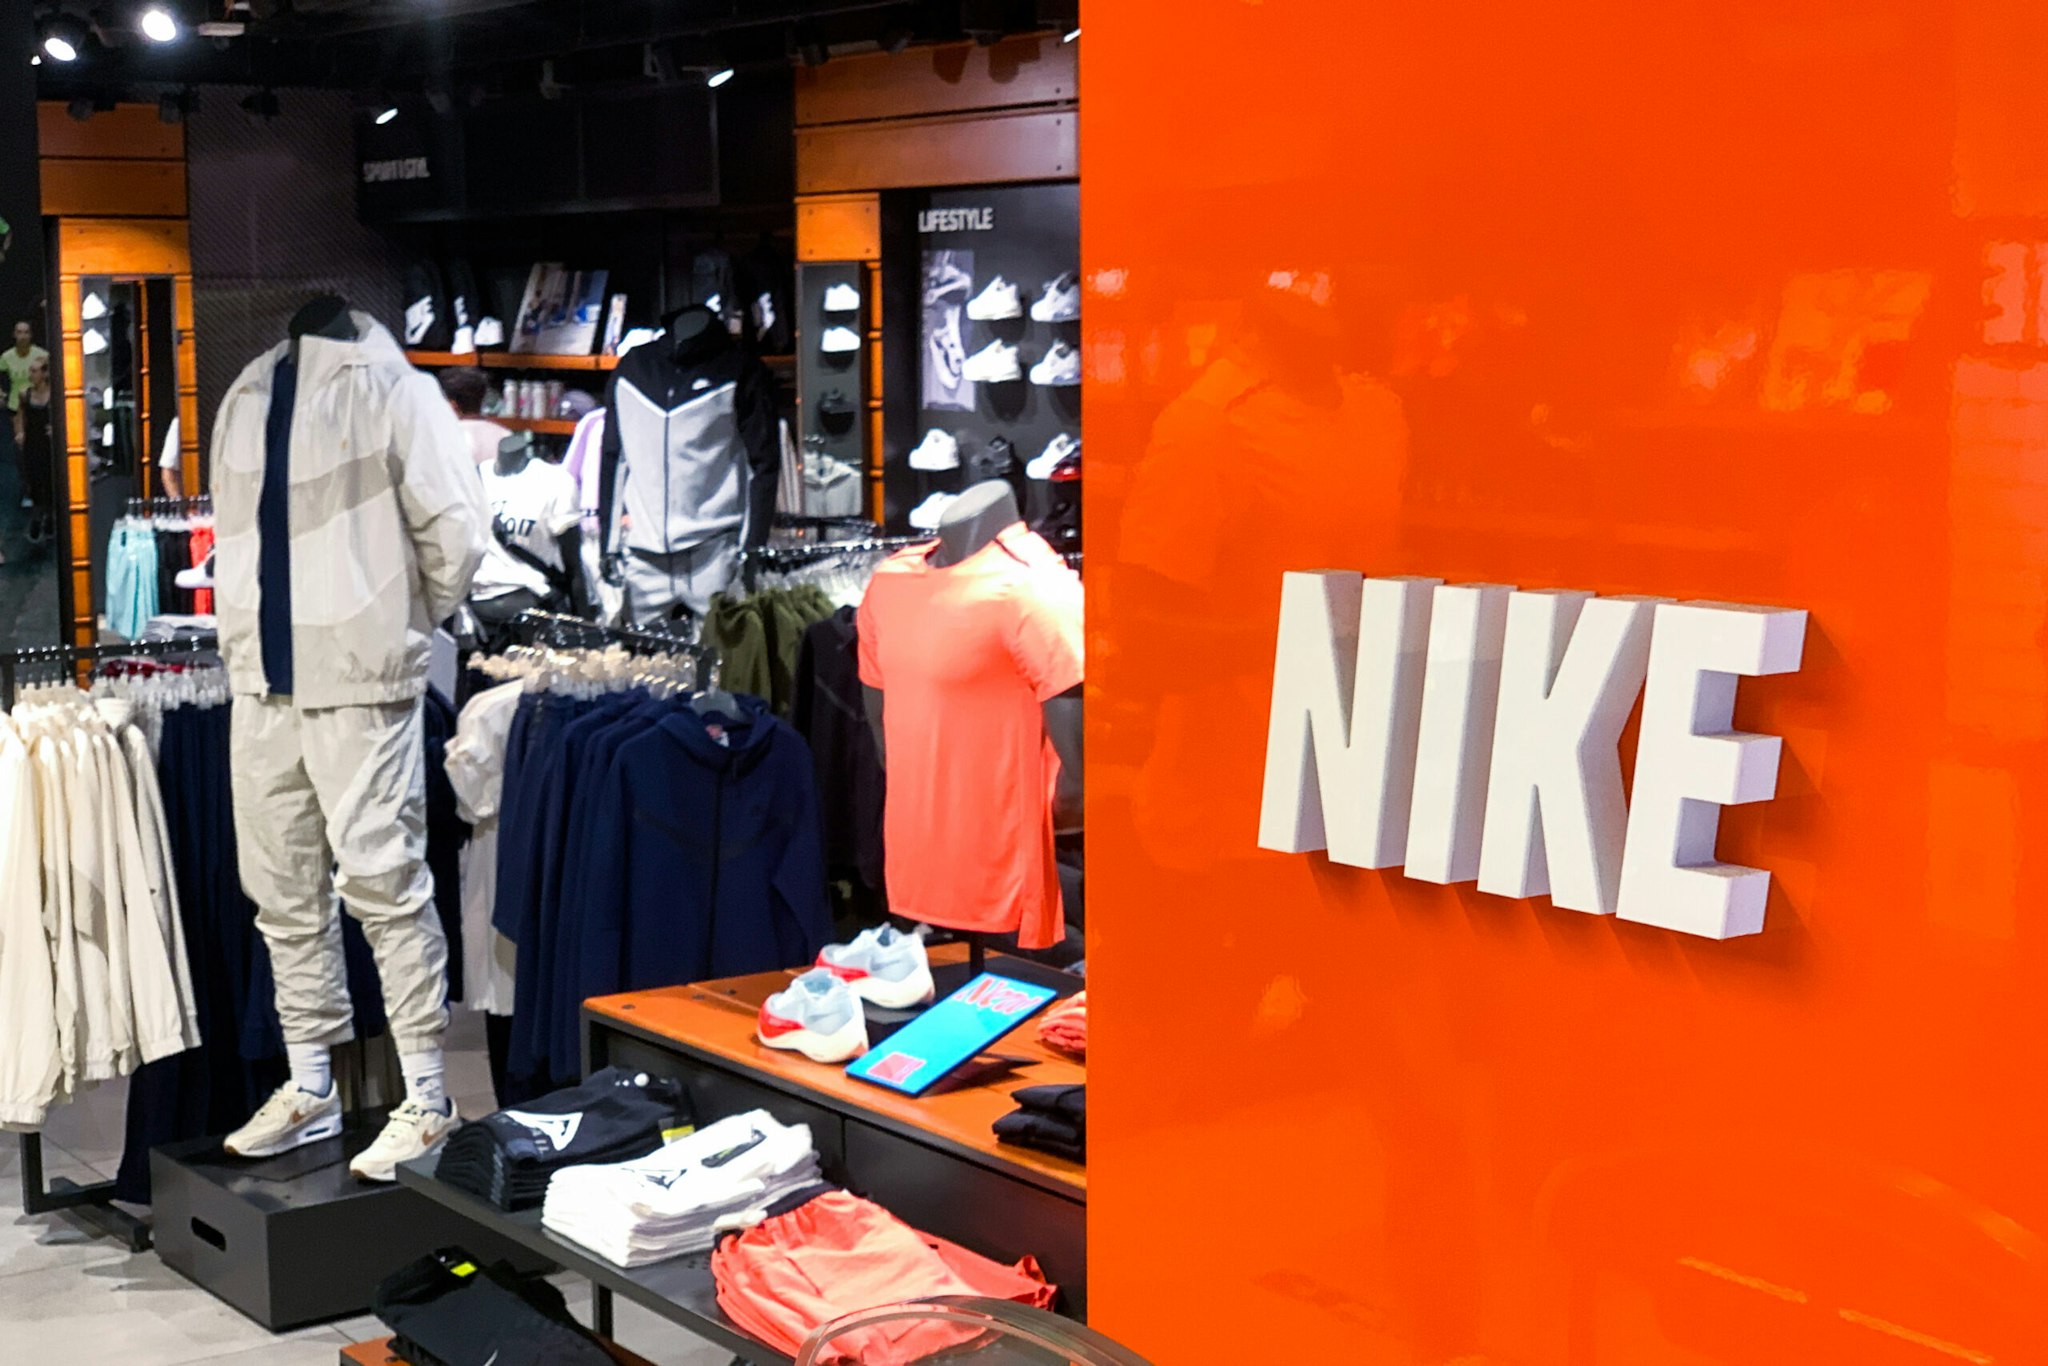 Nike logo is seen in the store in Krakow, Poland on August 26, 2021.